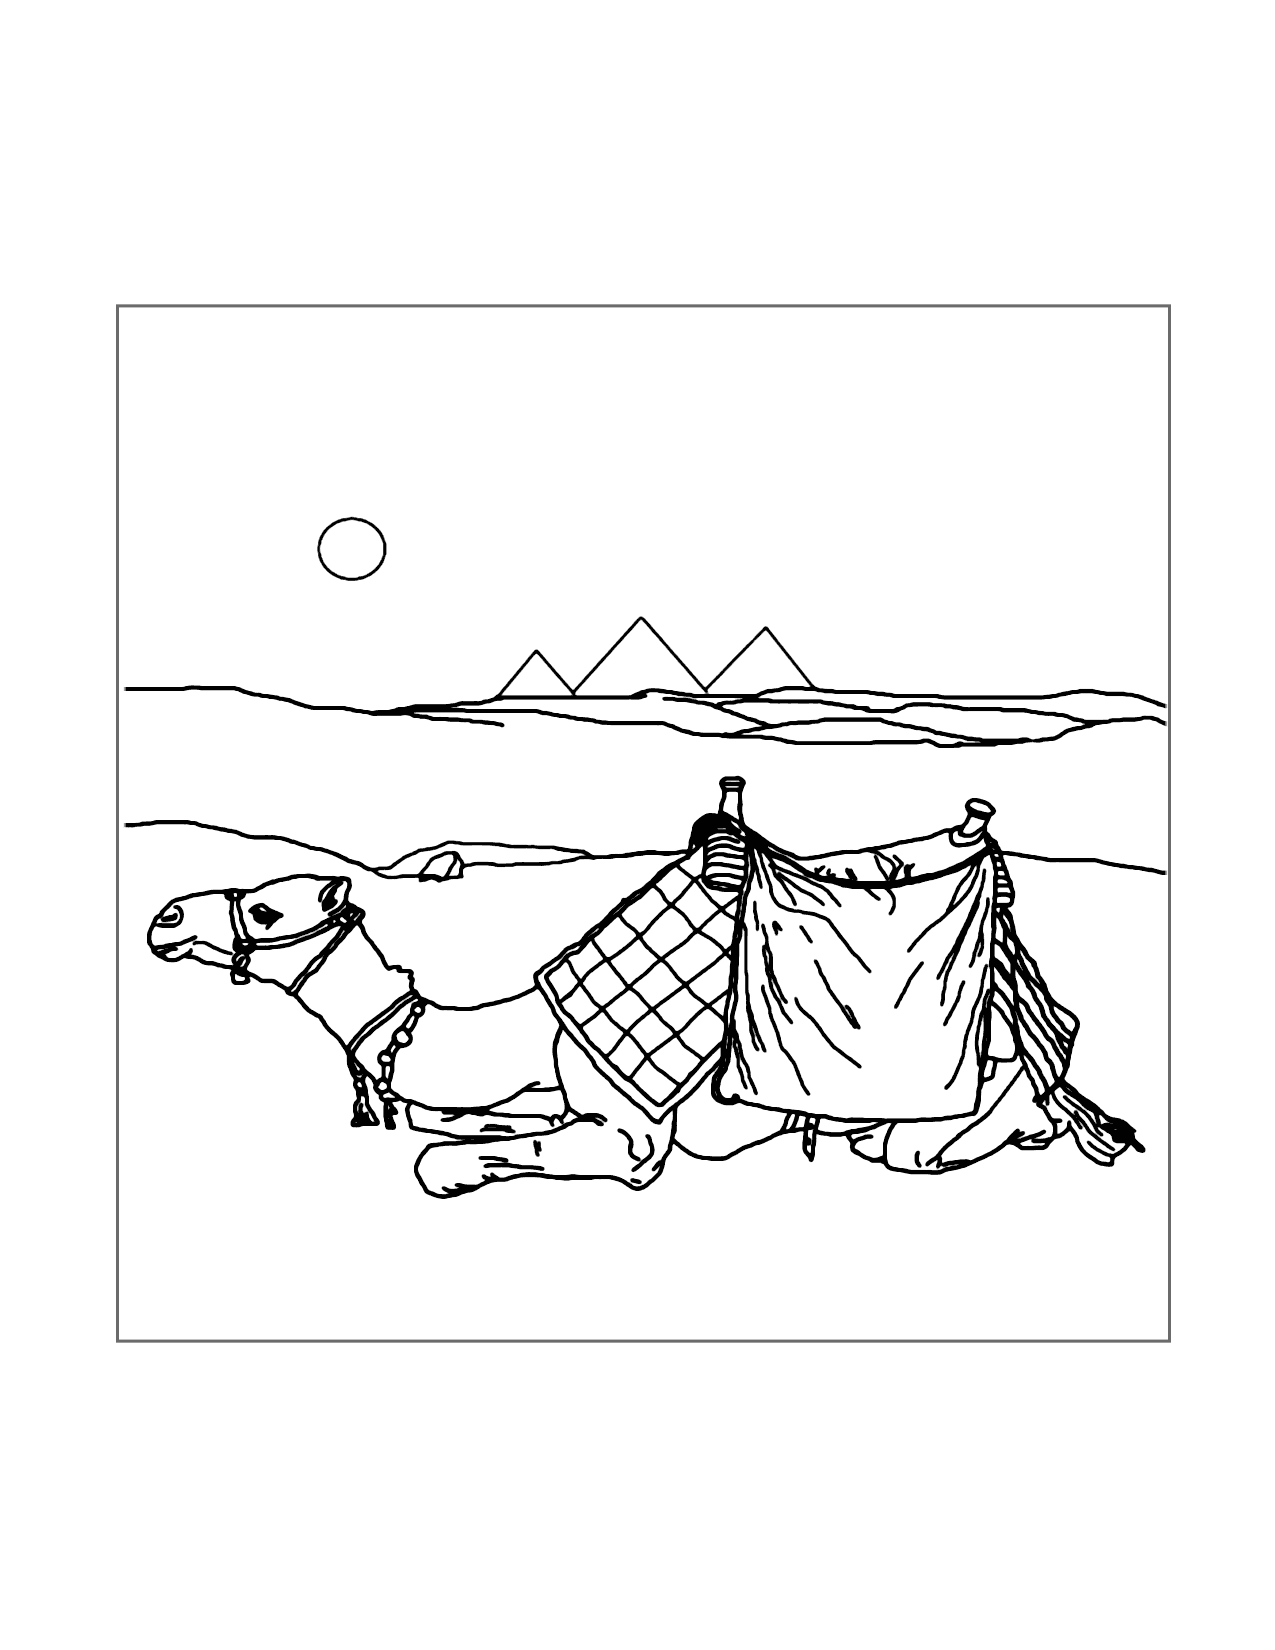 Camel In The Desert Coloring Page